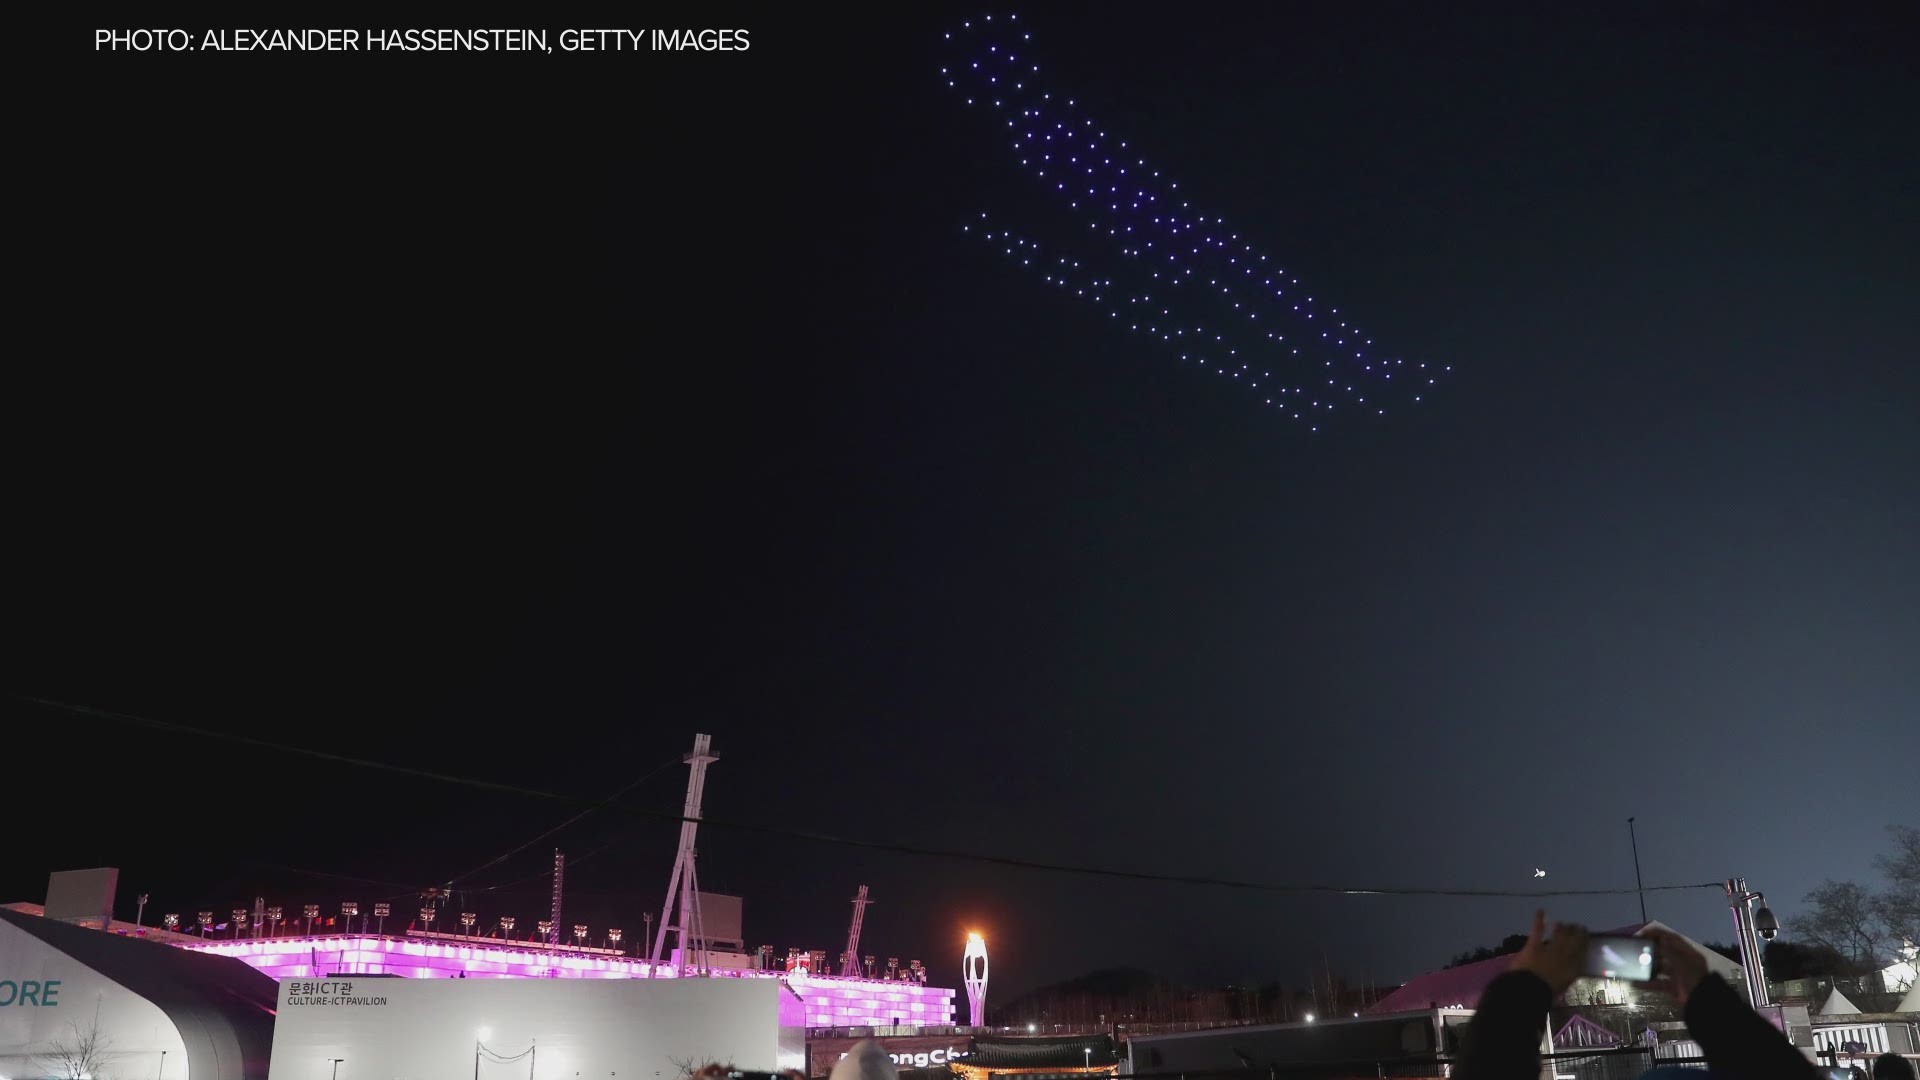 Hundreds of high-flying drones put on a show for spectators and Olympians at Thursday night's medal ceremony at the PyeongChang Winter Olympics.